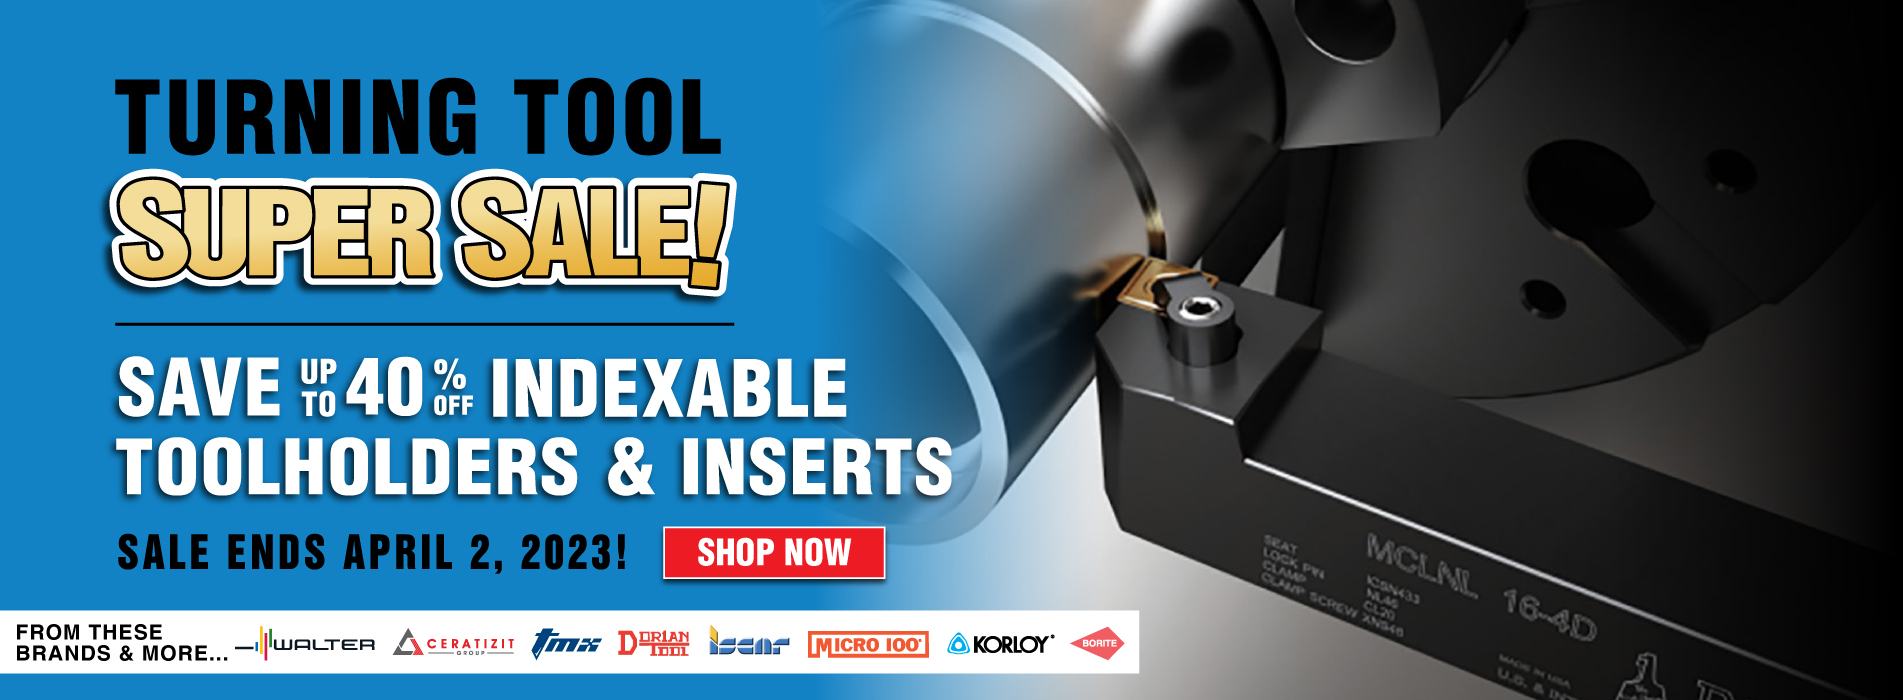 Turning Tool Super Sale! Turn Those Savings Into New Tools! Up to 40% off Indexable Toolholders & Inserts!